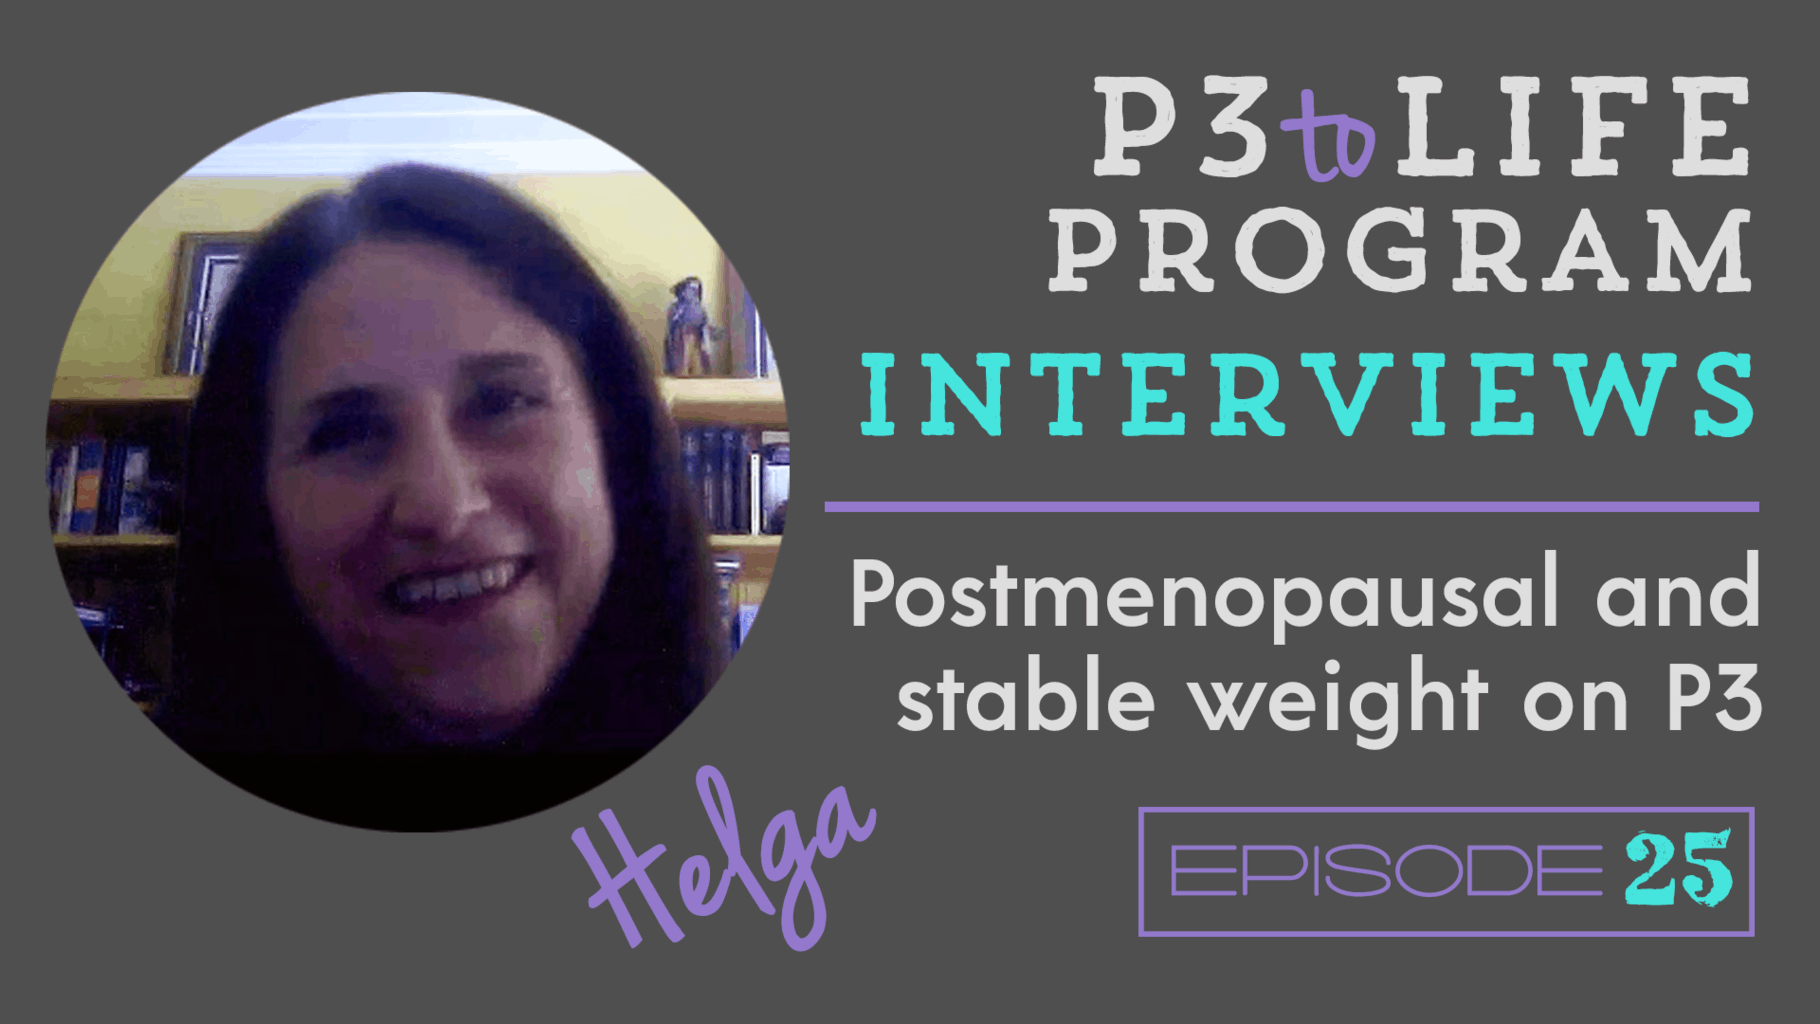 P3tolife-postmenopause-maintaining-weight-stable-in-phase-3-interview-episode-25